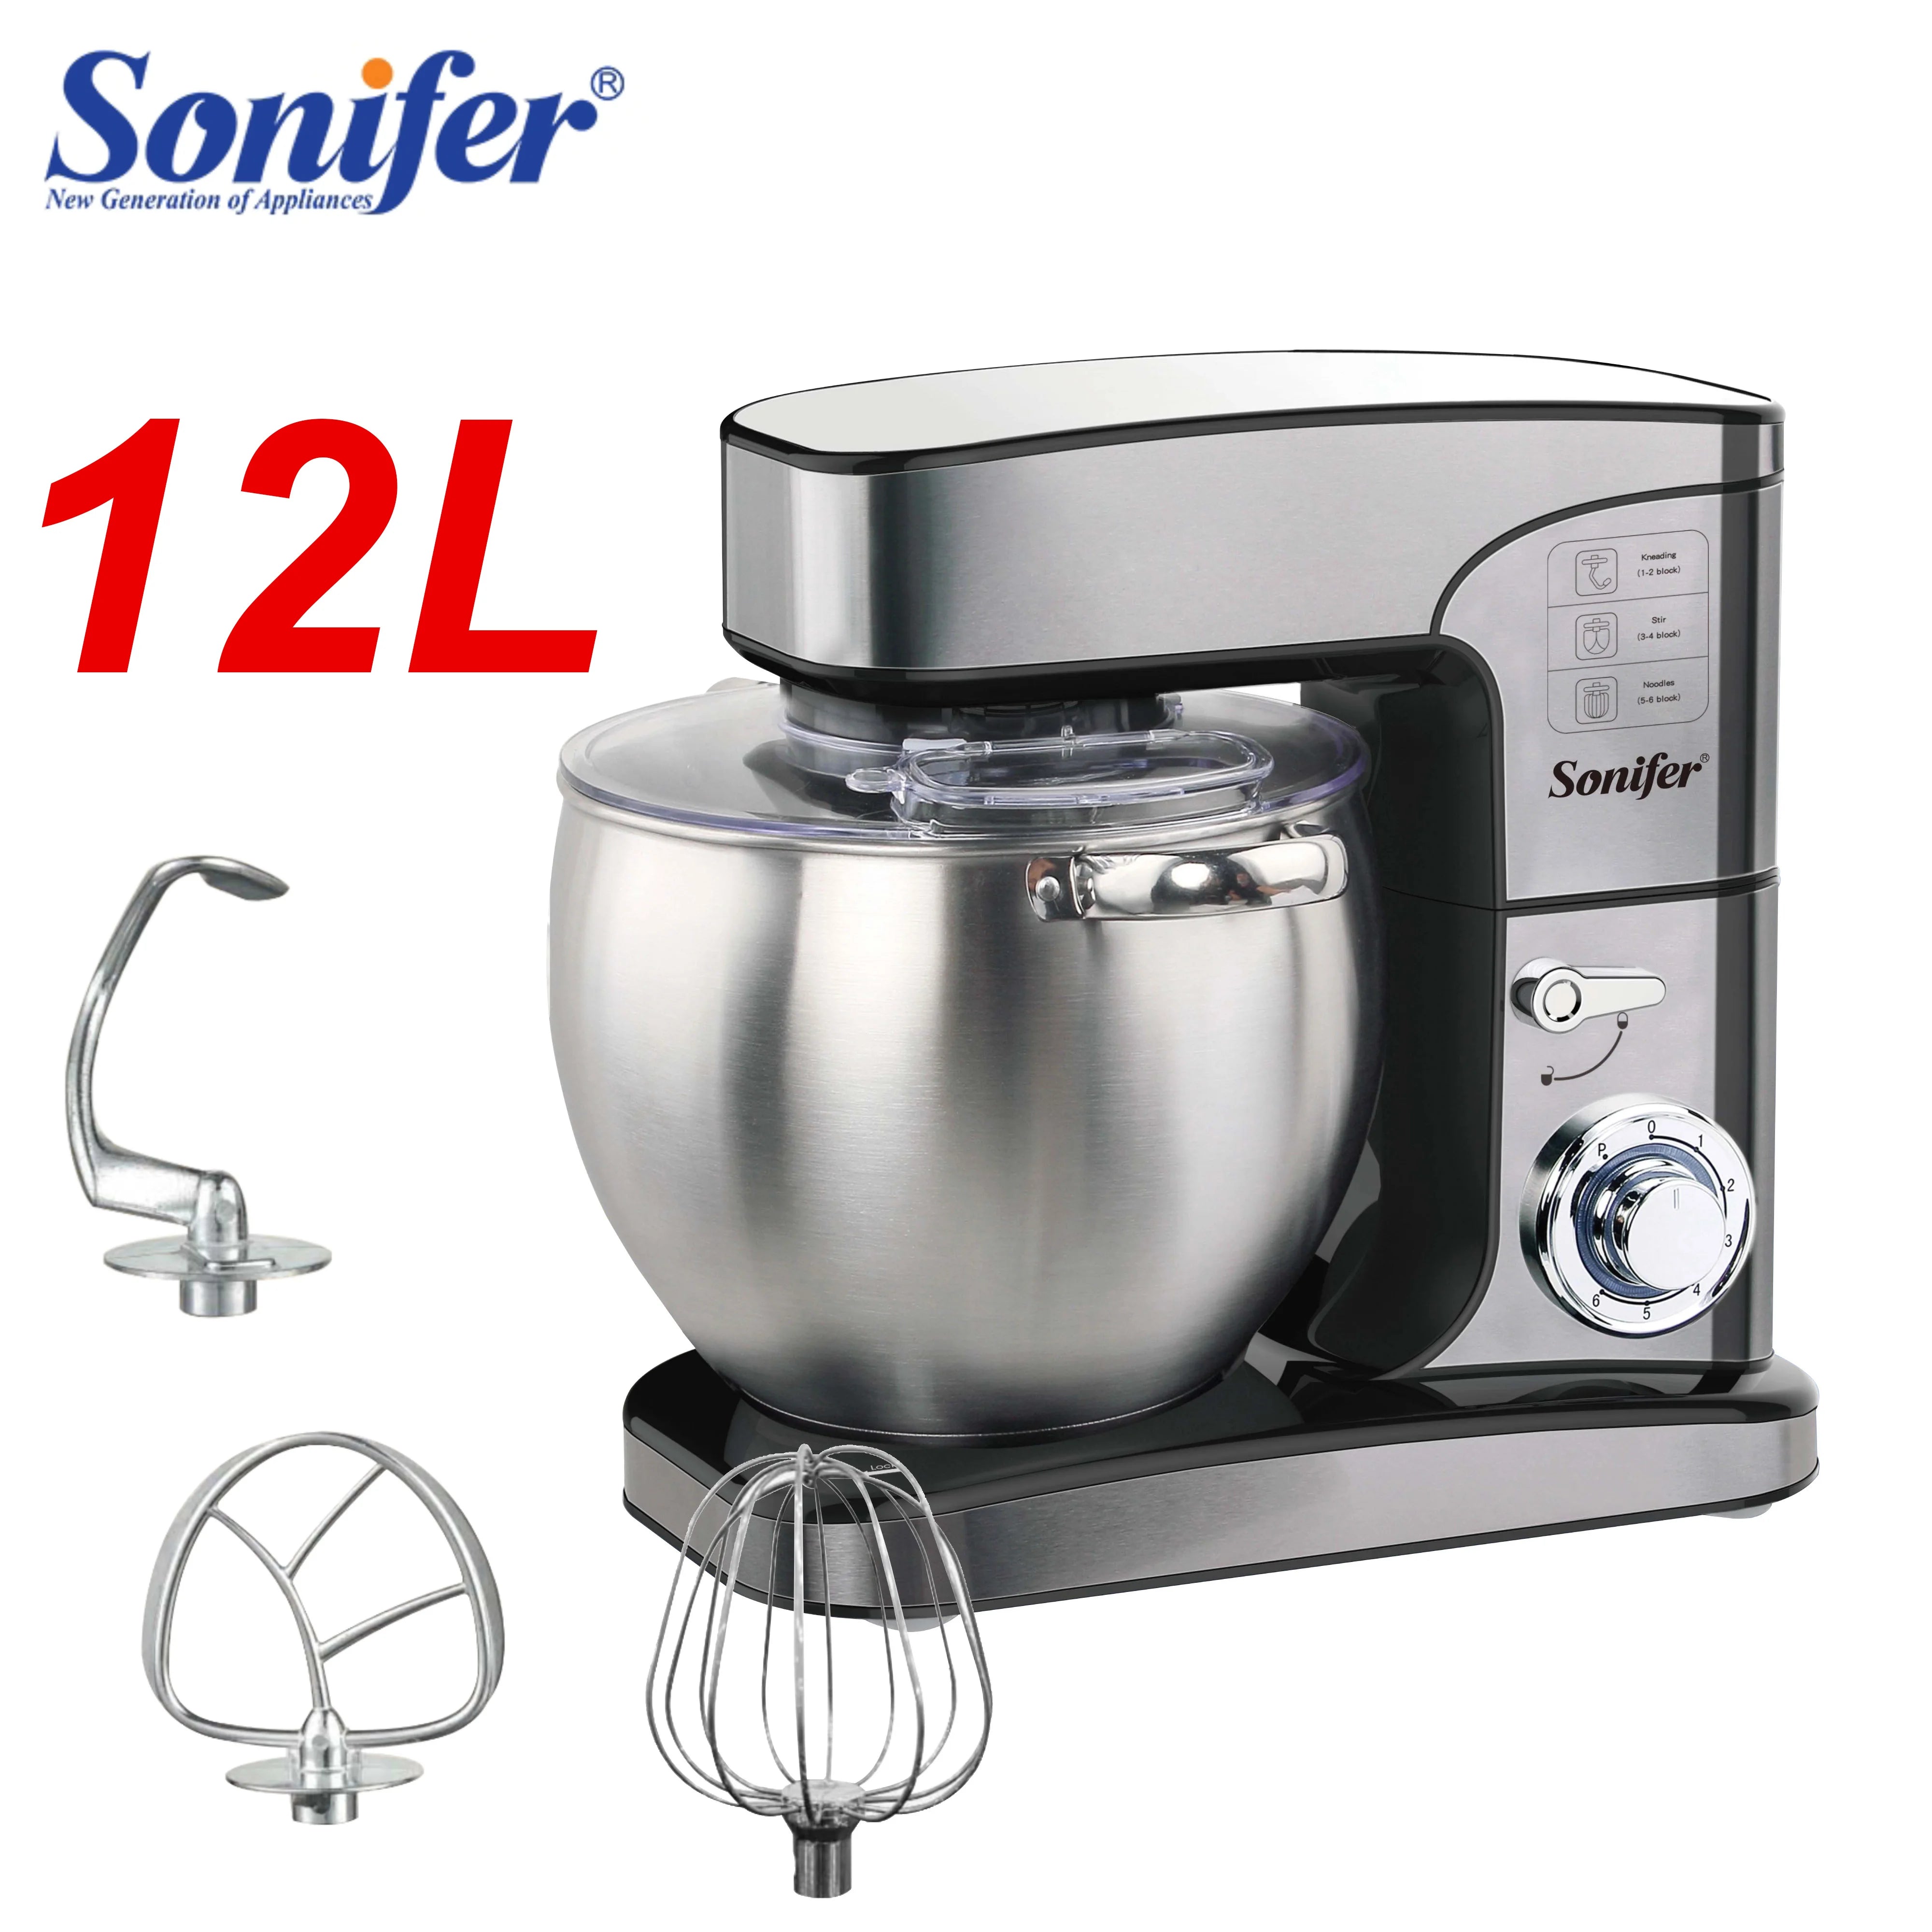 12L Stand Mixer Kitchen Aid Food Blender Cream Whisk Cake Dough Mixers With Bowl Stainless Steel Chef Machine Charm Sonifer